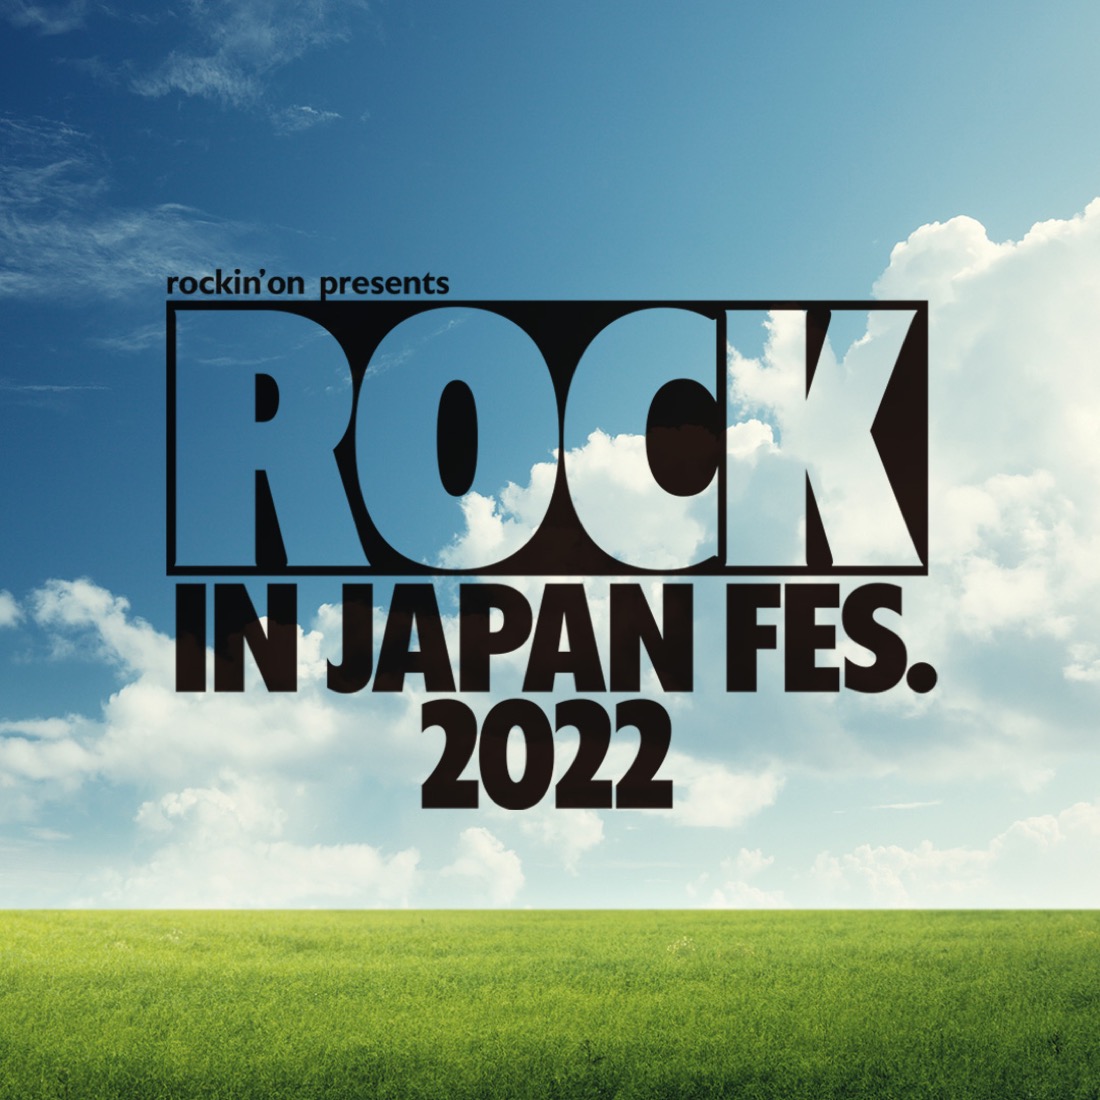 『ROCK IN JAPAN FES. 2022』マカえん、UVER、櫻坂46ら17組の出演があらたに決定 - 画像一覧（4/4）